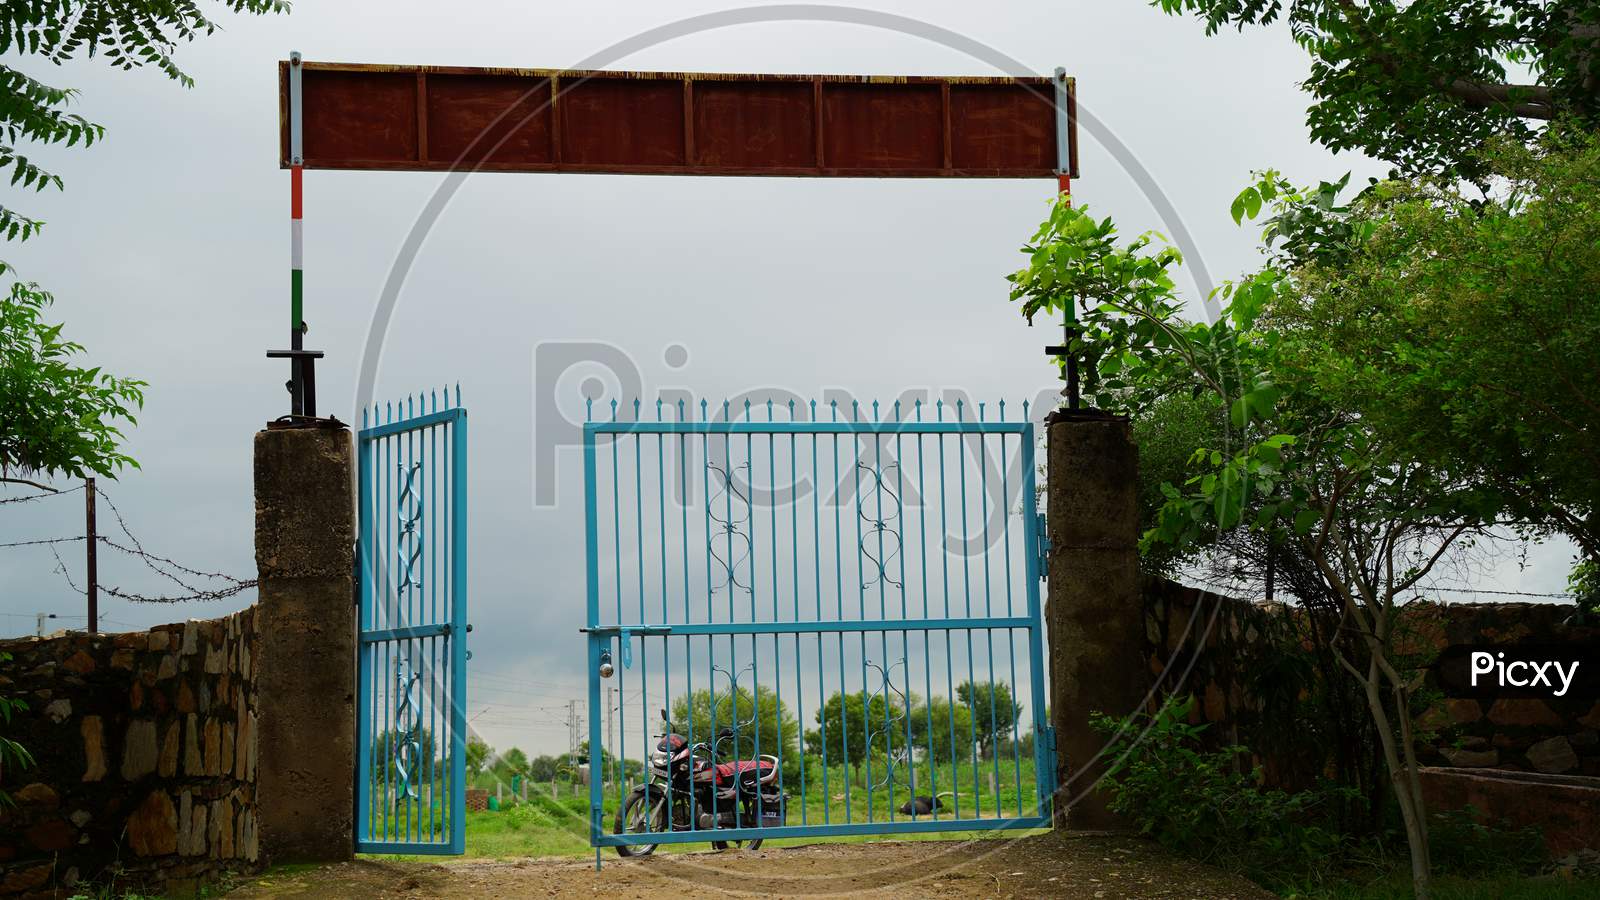 Iron fence gate of School. Empty gate without children.